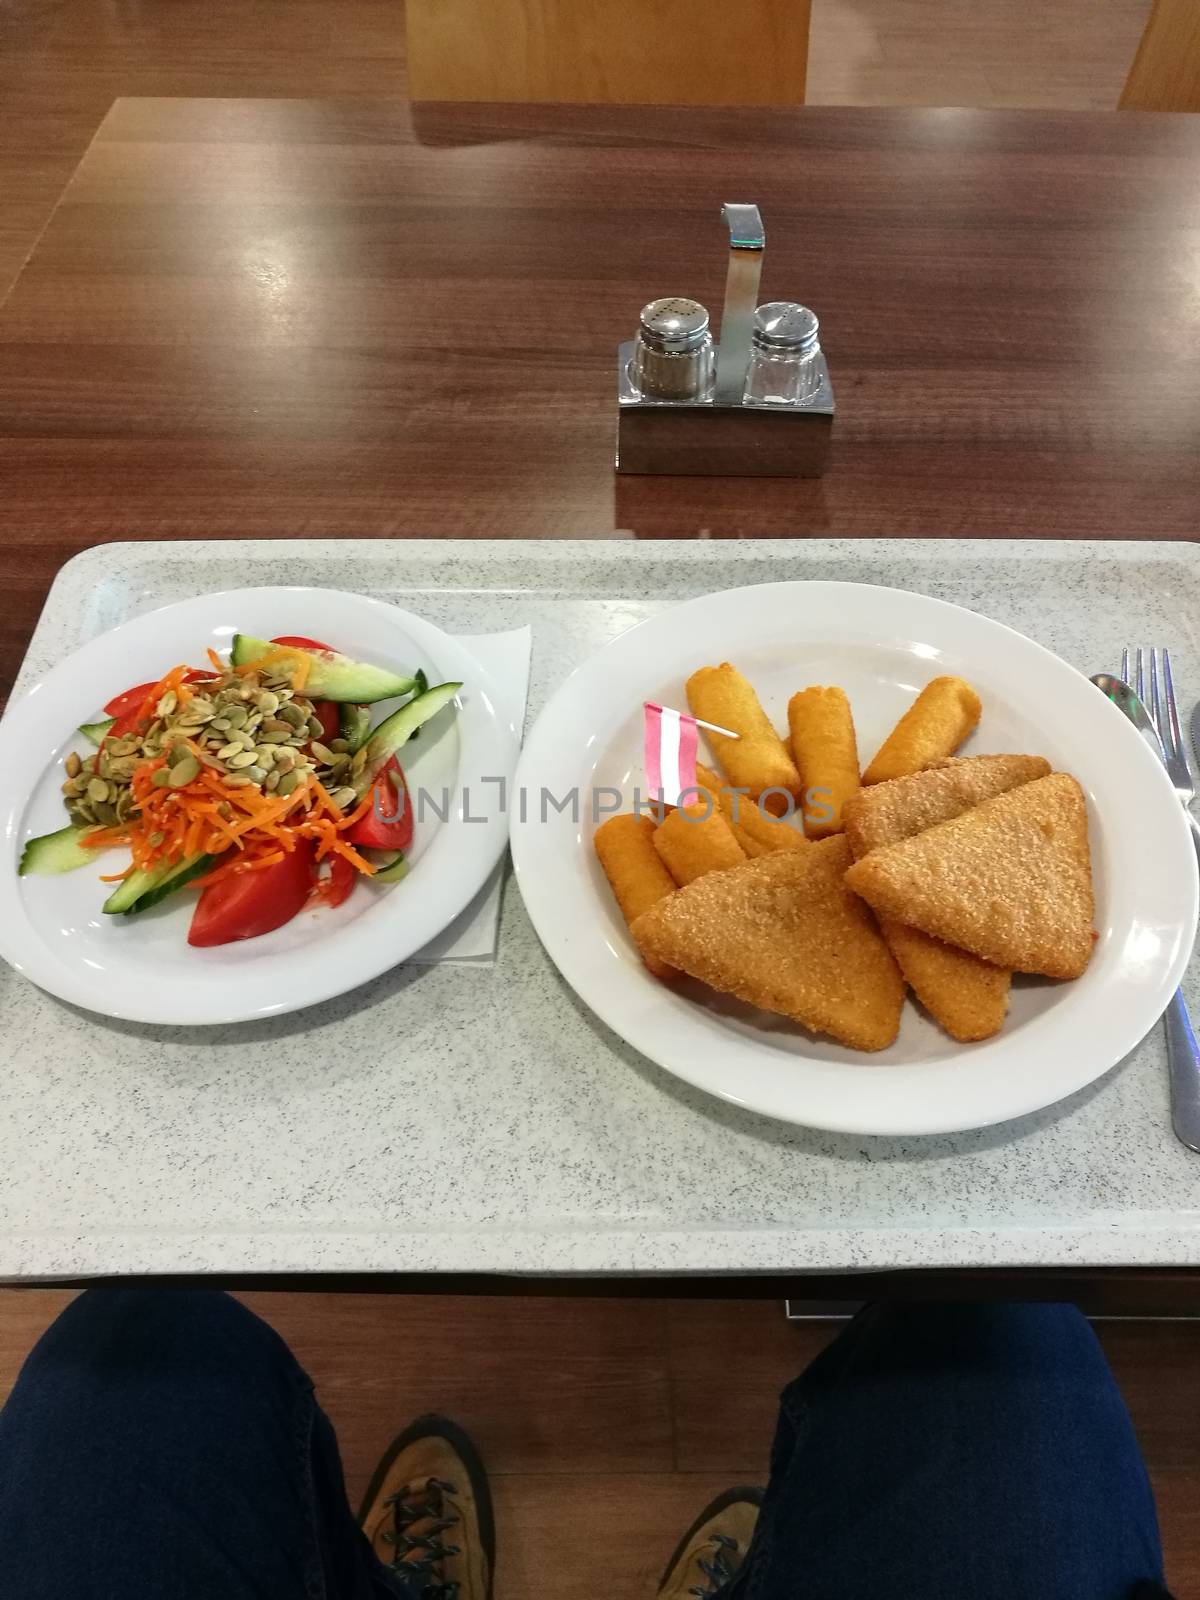 Fried cheese with croquettes and mixed salad. High quality photo